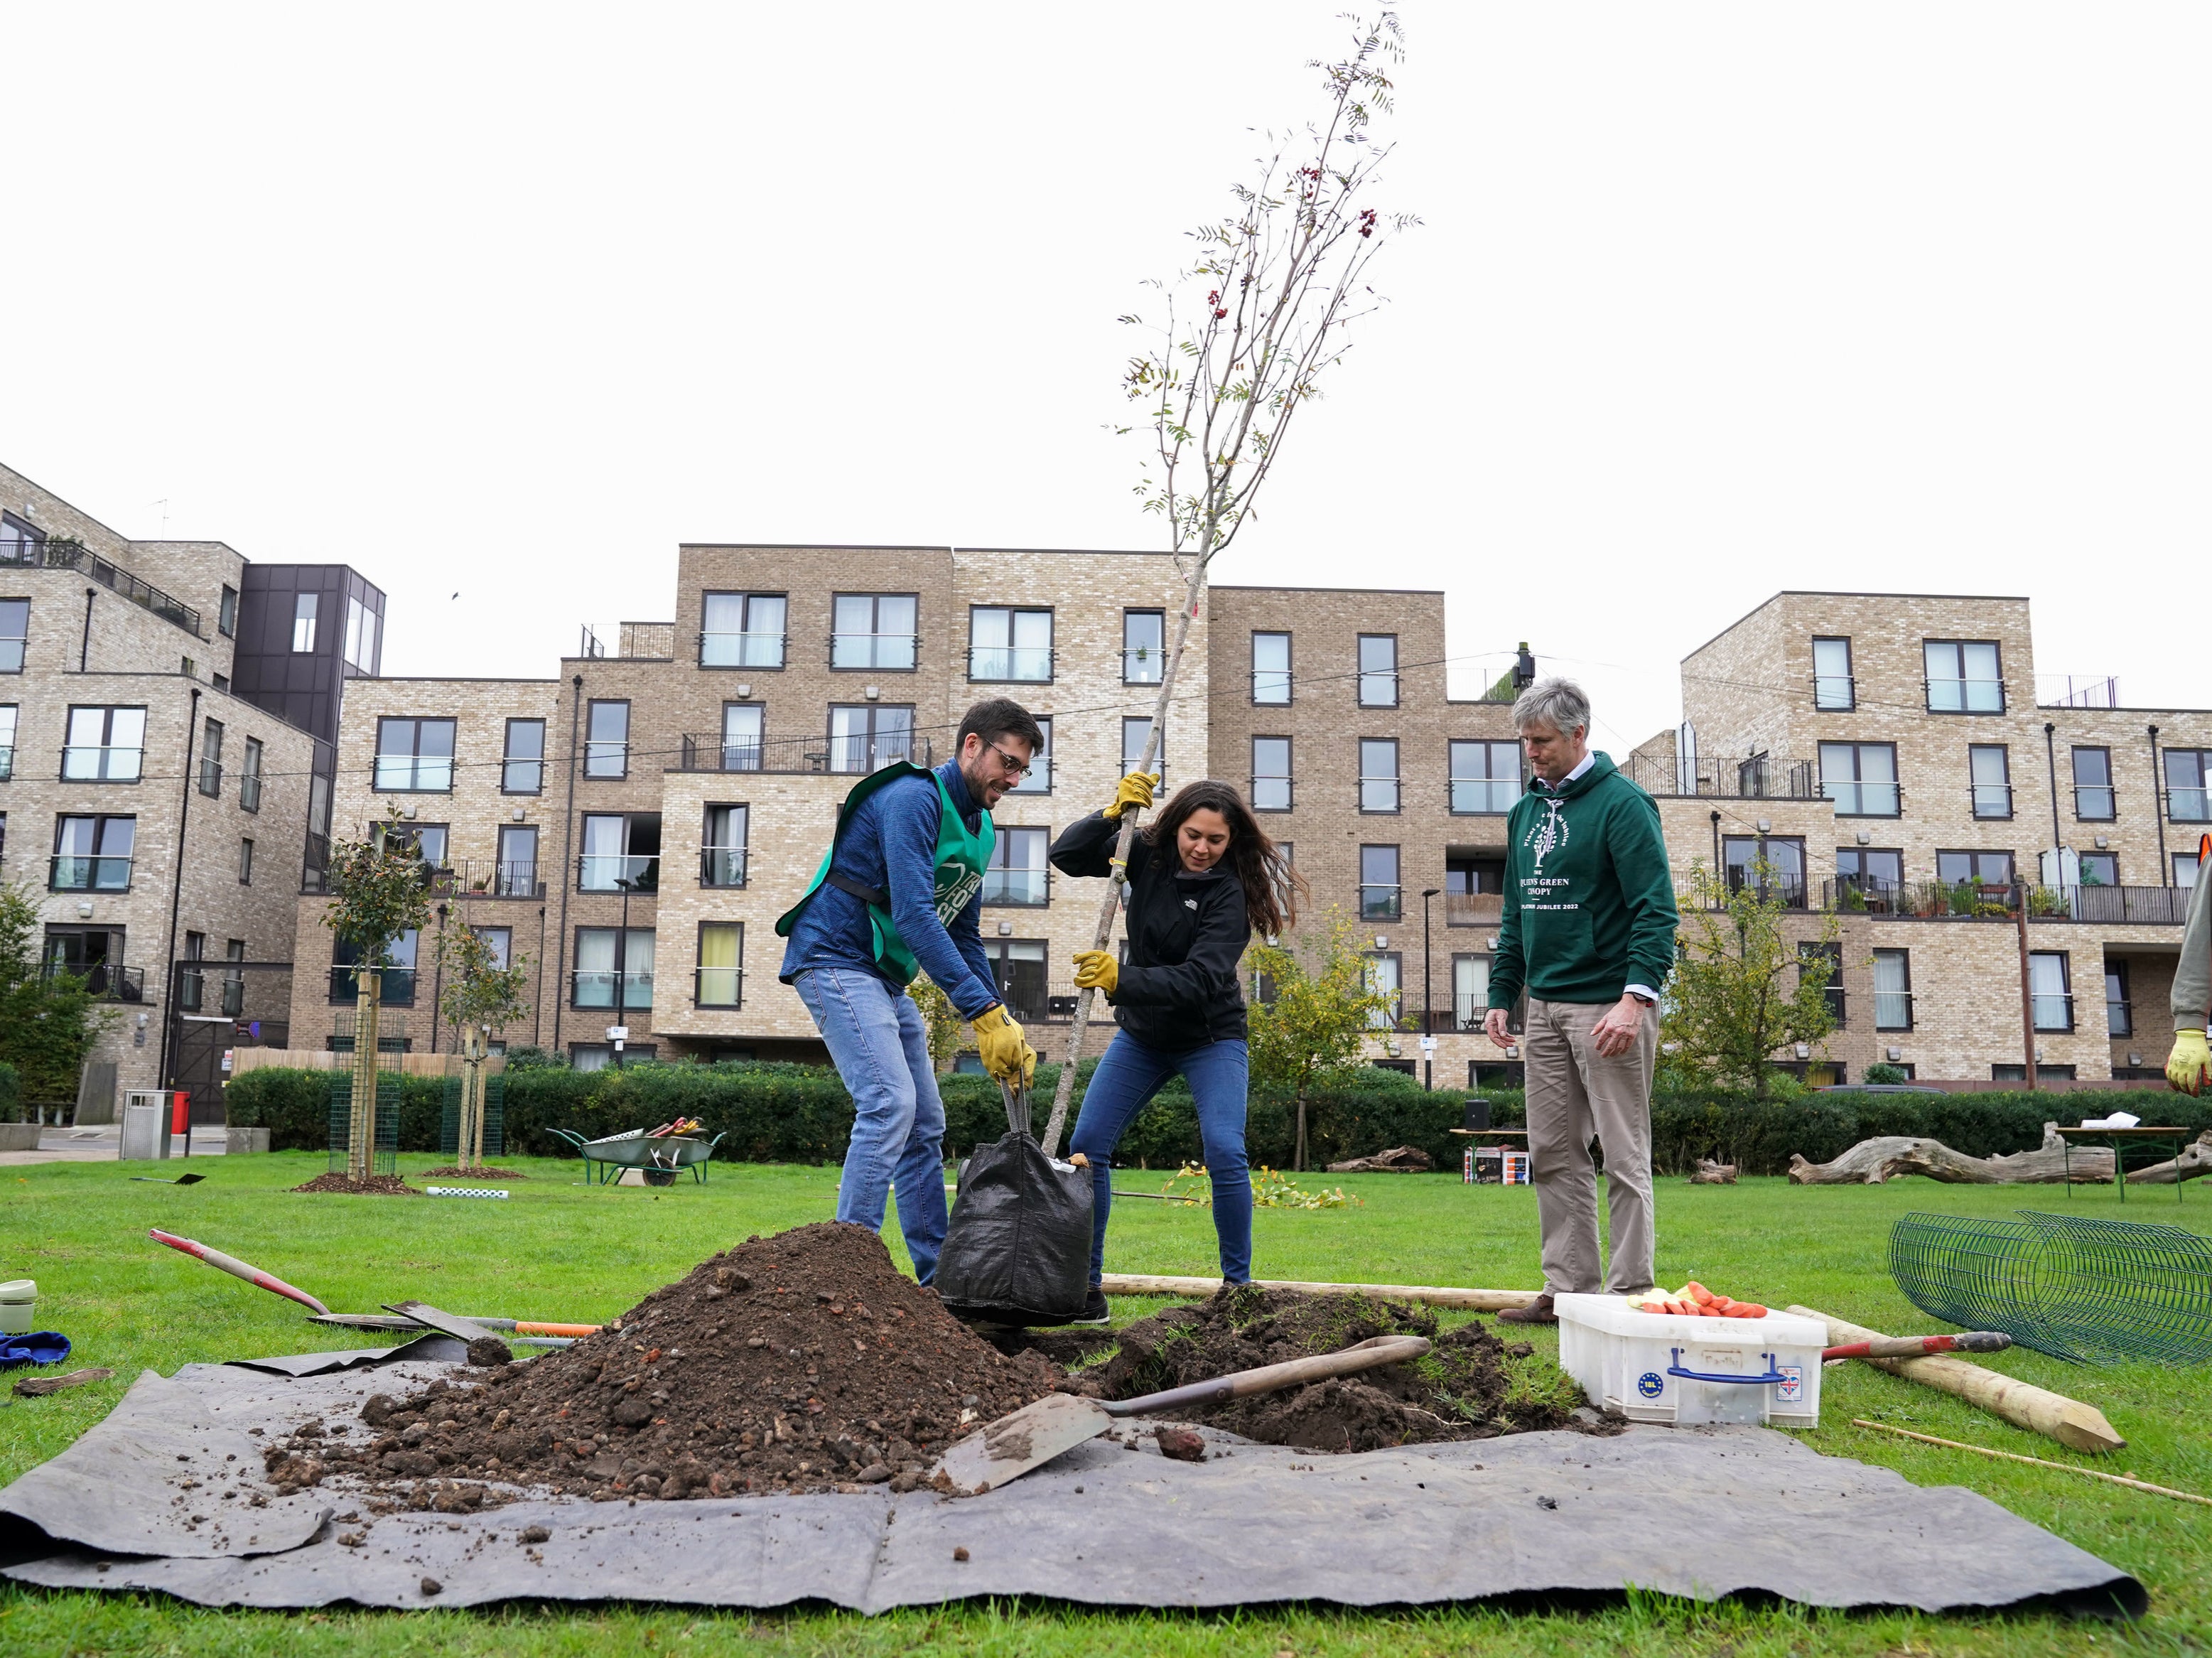 Volunteers help plant a tree at Furze Green in Tower Hamlets, east London, where the Queen's Green Canopy is unveiling its first urban greening project to mark to the Queen's Platinum Jubilee in 2022